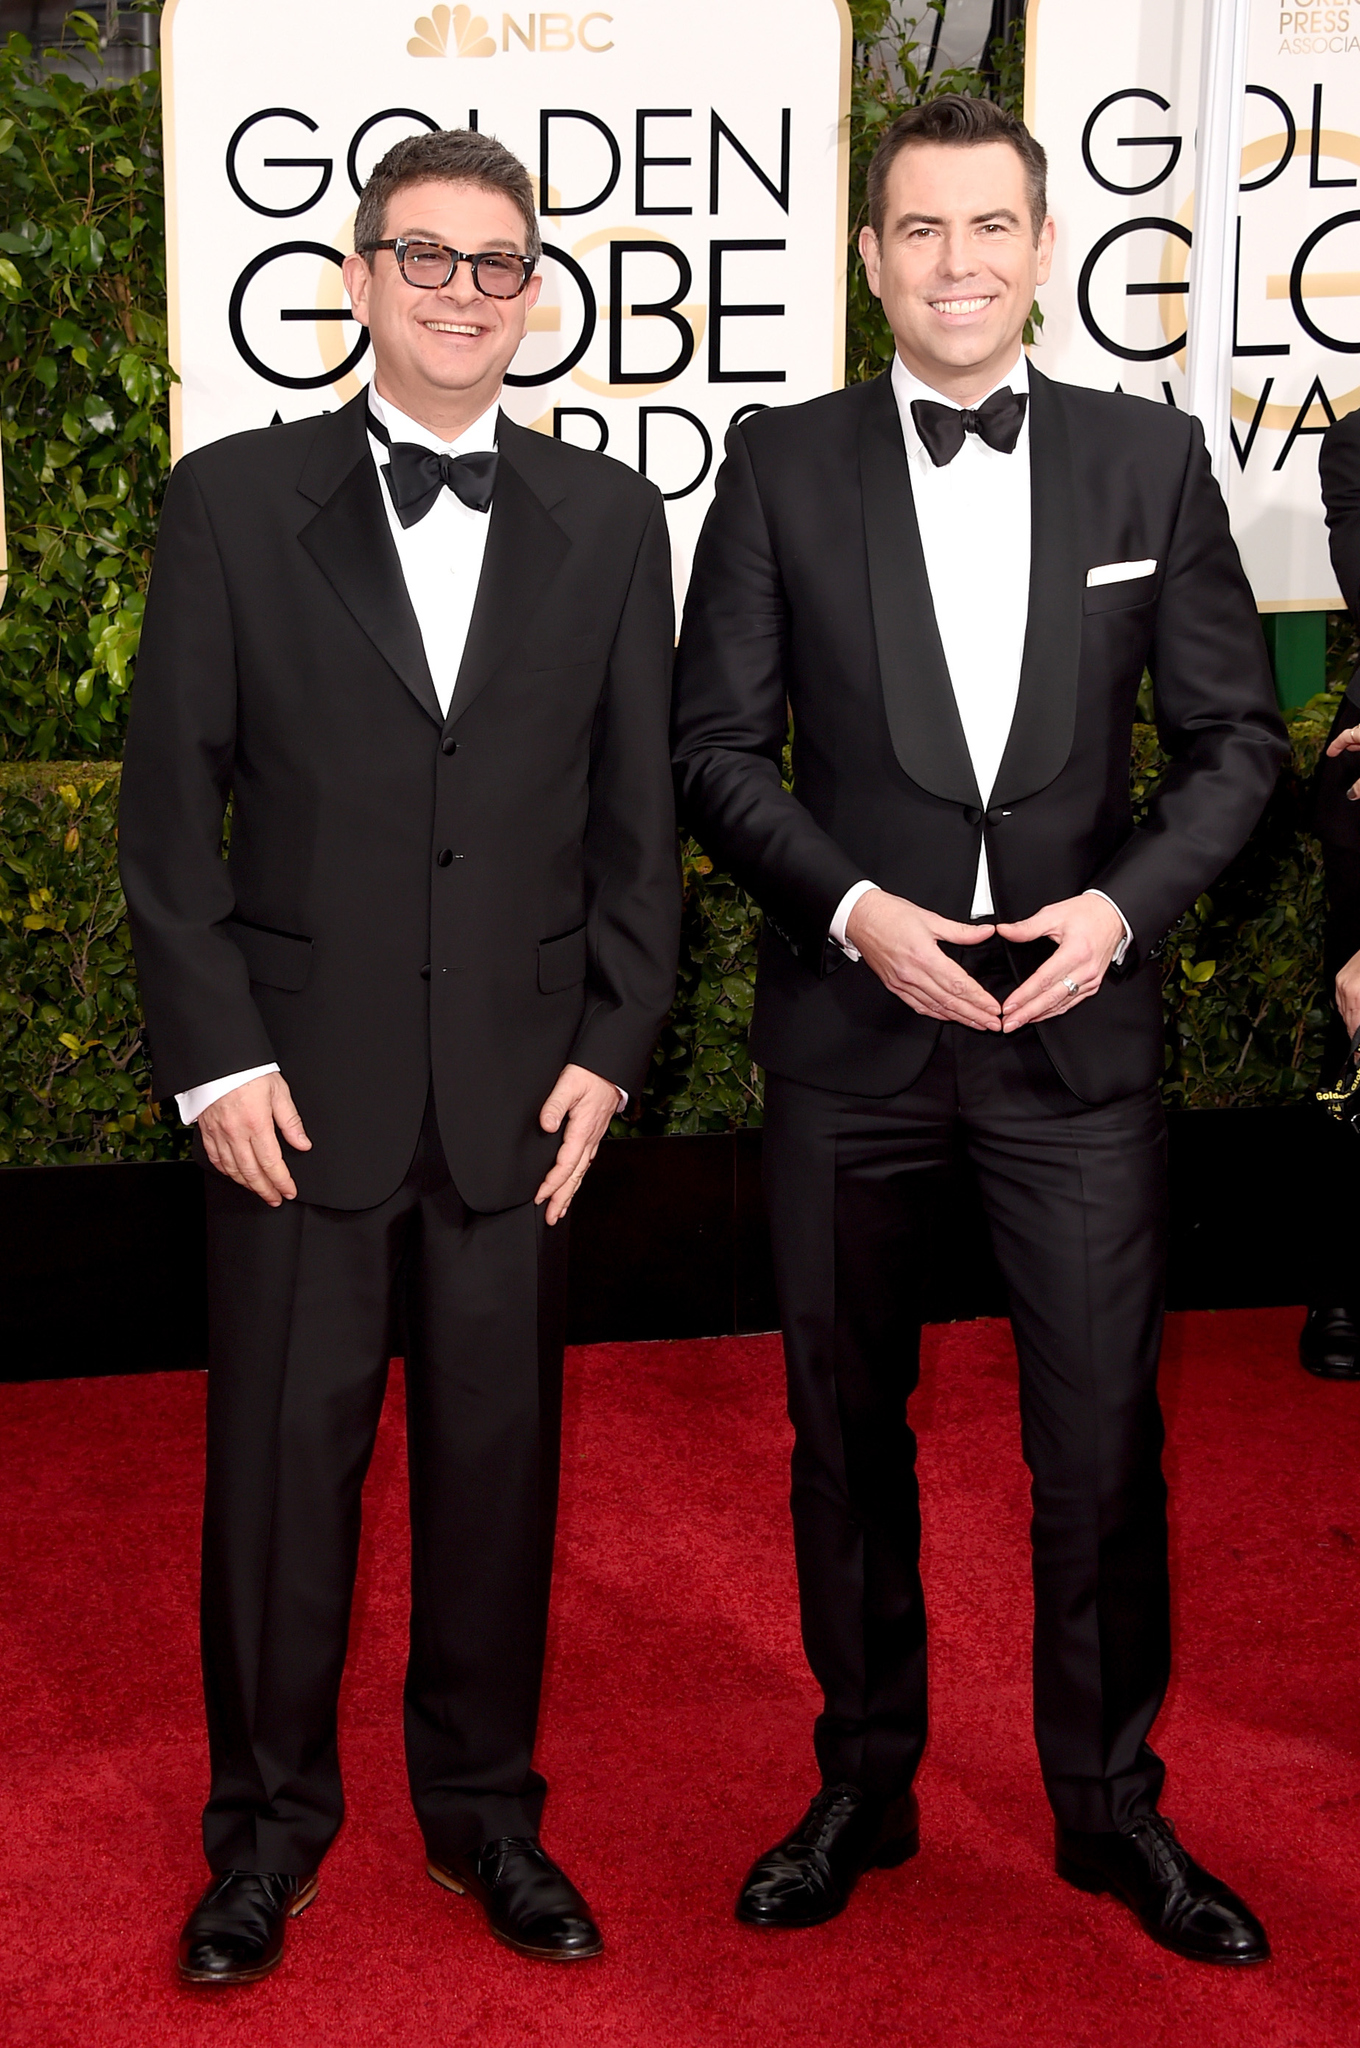 Stephen Beresford and David Livingstone at event of 72nd Golden Globe Awards (2015)